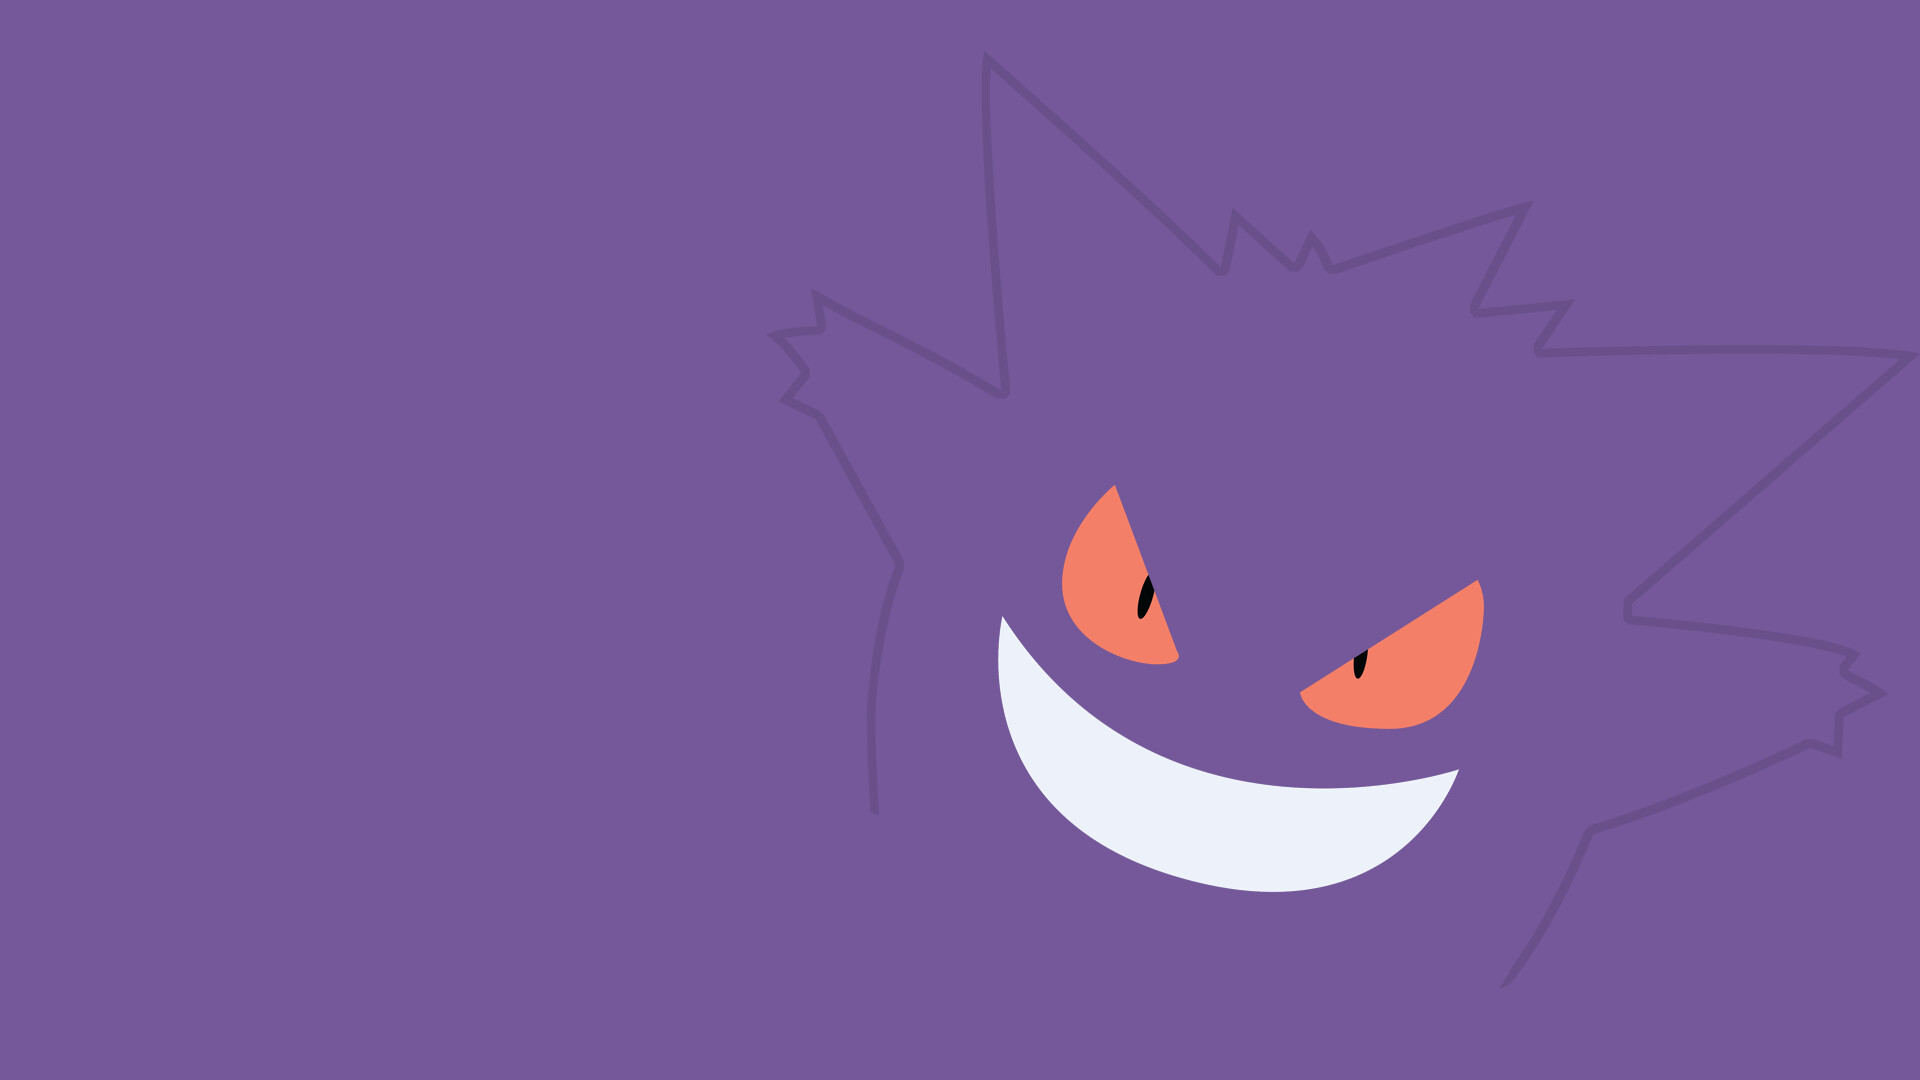 Gengar: Short spikes on the back, Two red eyes, A sinister smile, Evolving from Haunter when traded. 1920x1080 Full HD Wallpaper.